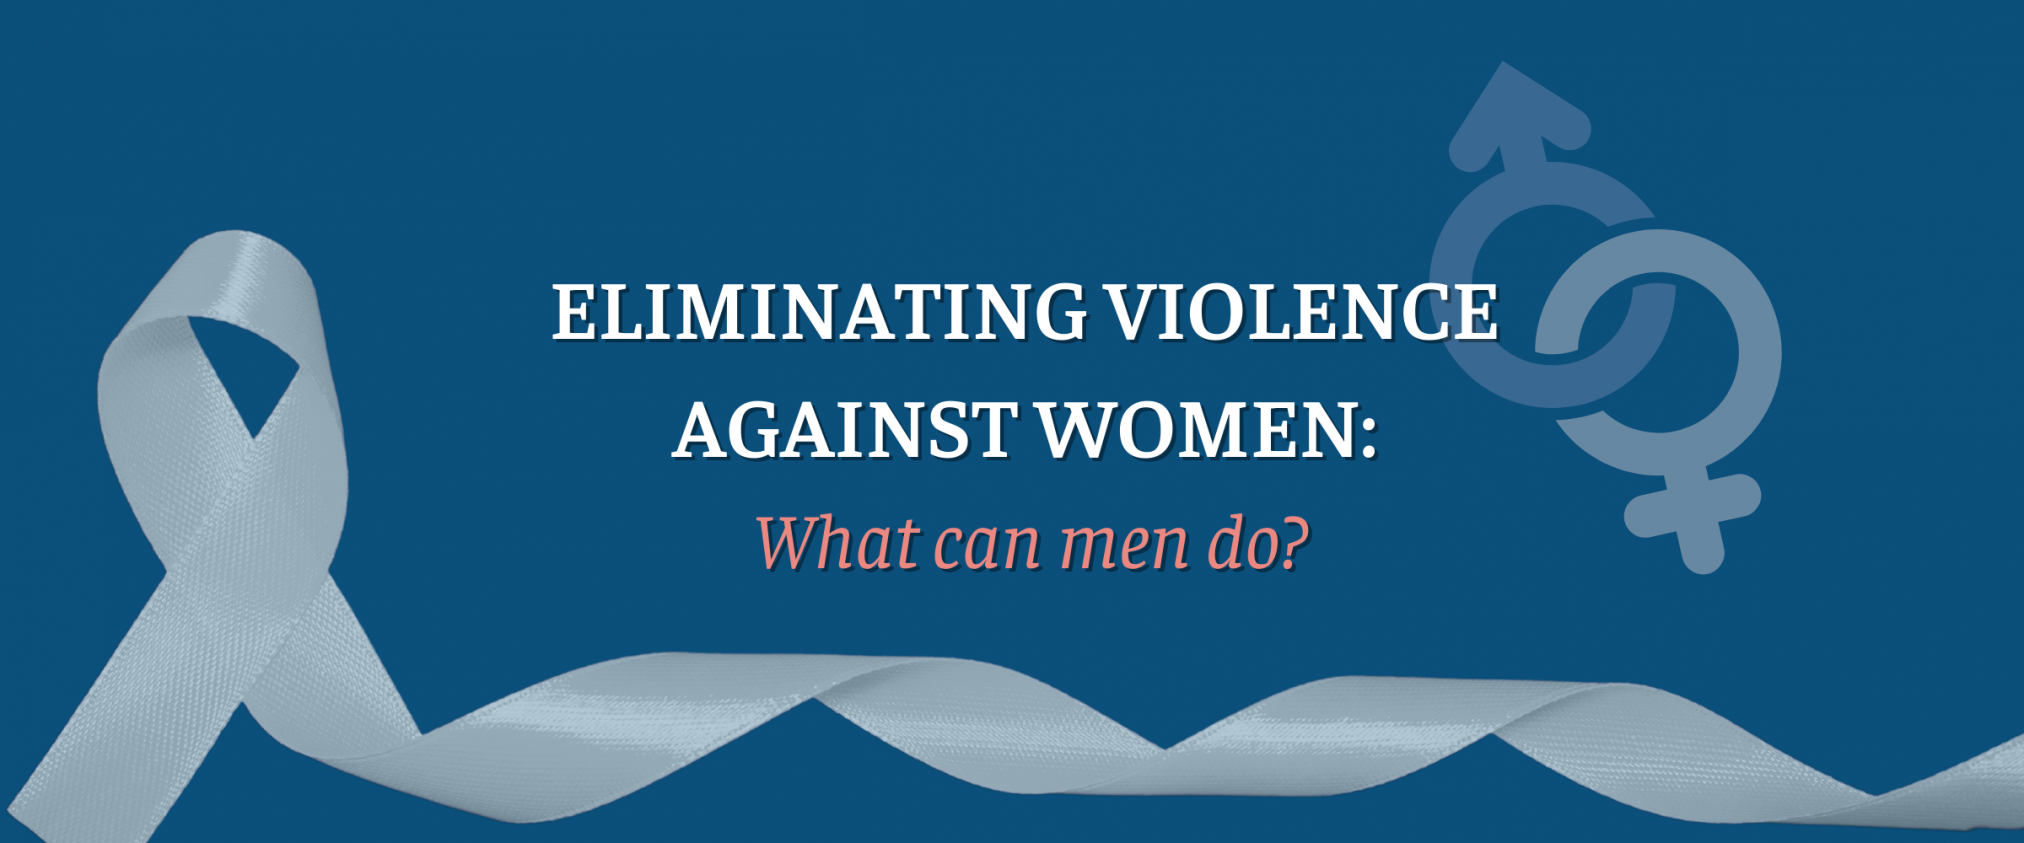 White ribbon and text "Eliminating violence against women: What can men do?"